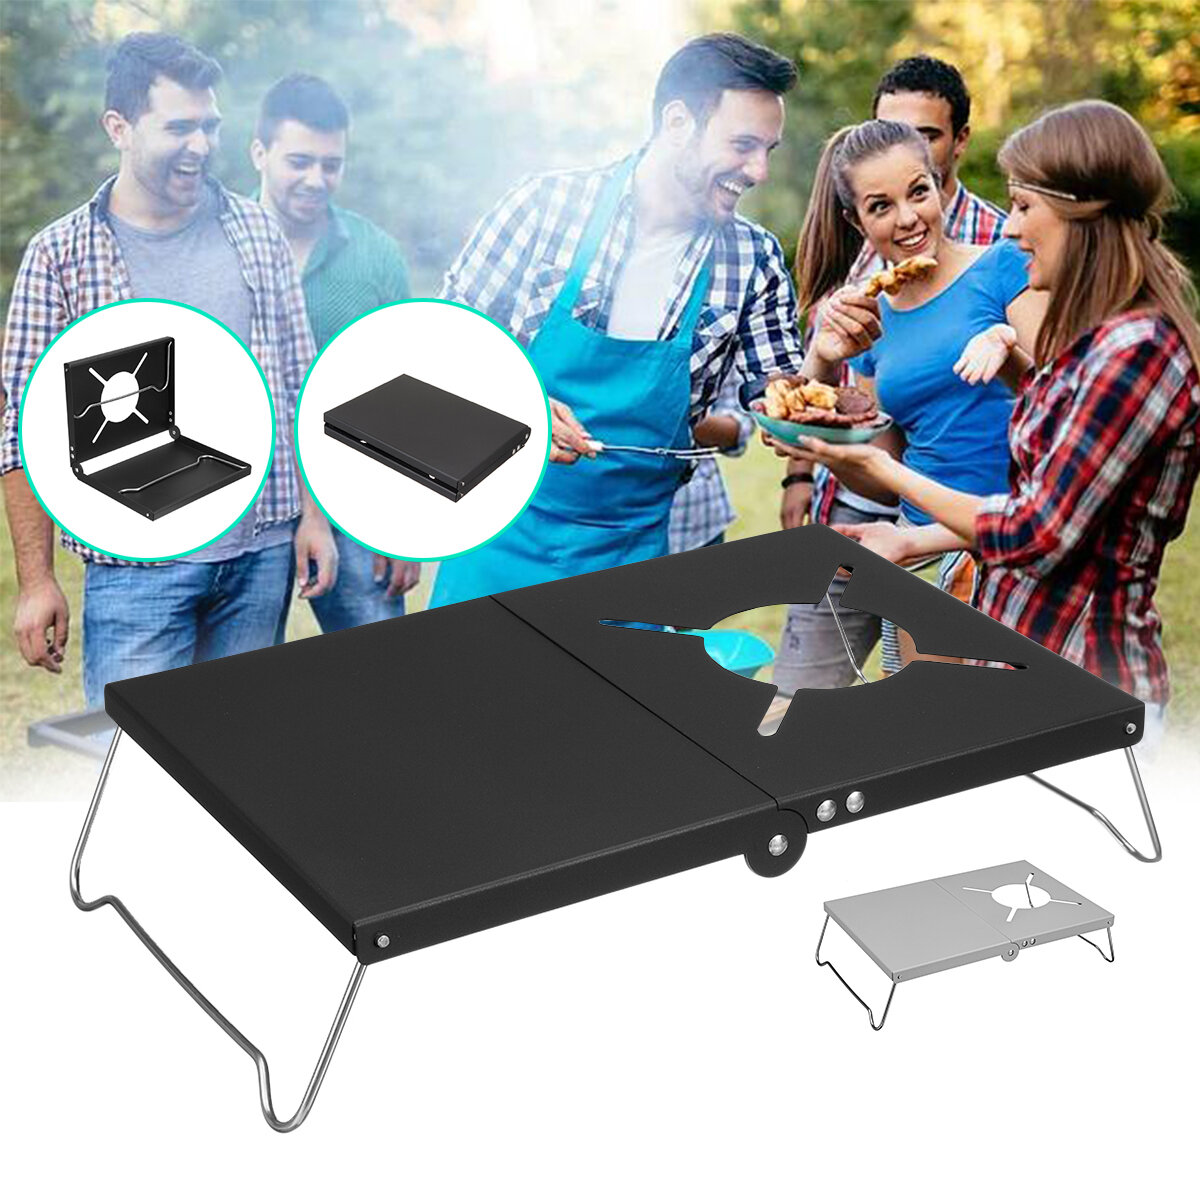 Camping Folding Stove Table Portable BBQ Grill Folding Picnic Desk BBQ Stove Stand Bracket for Camping Picnic Accessories